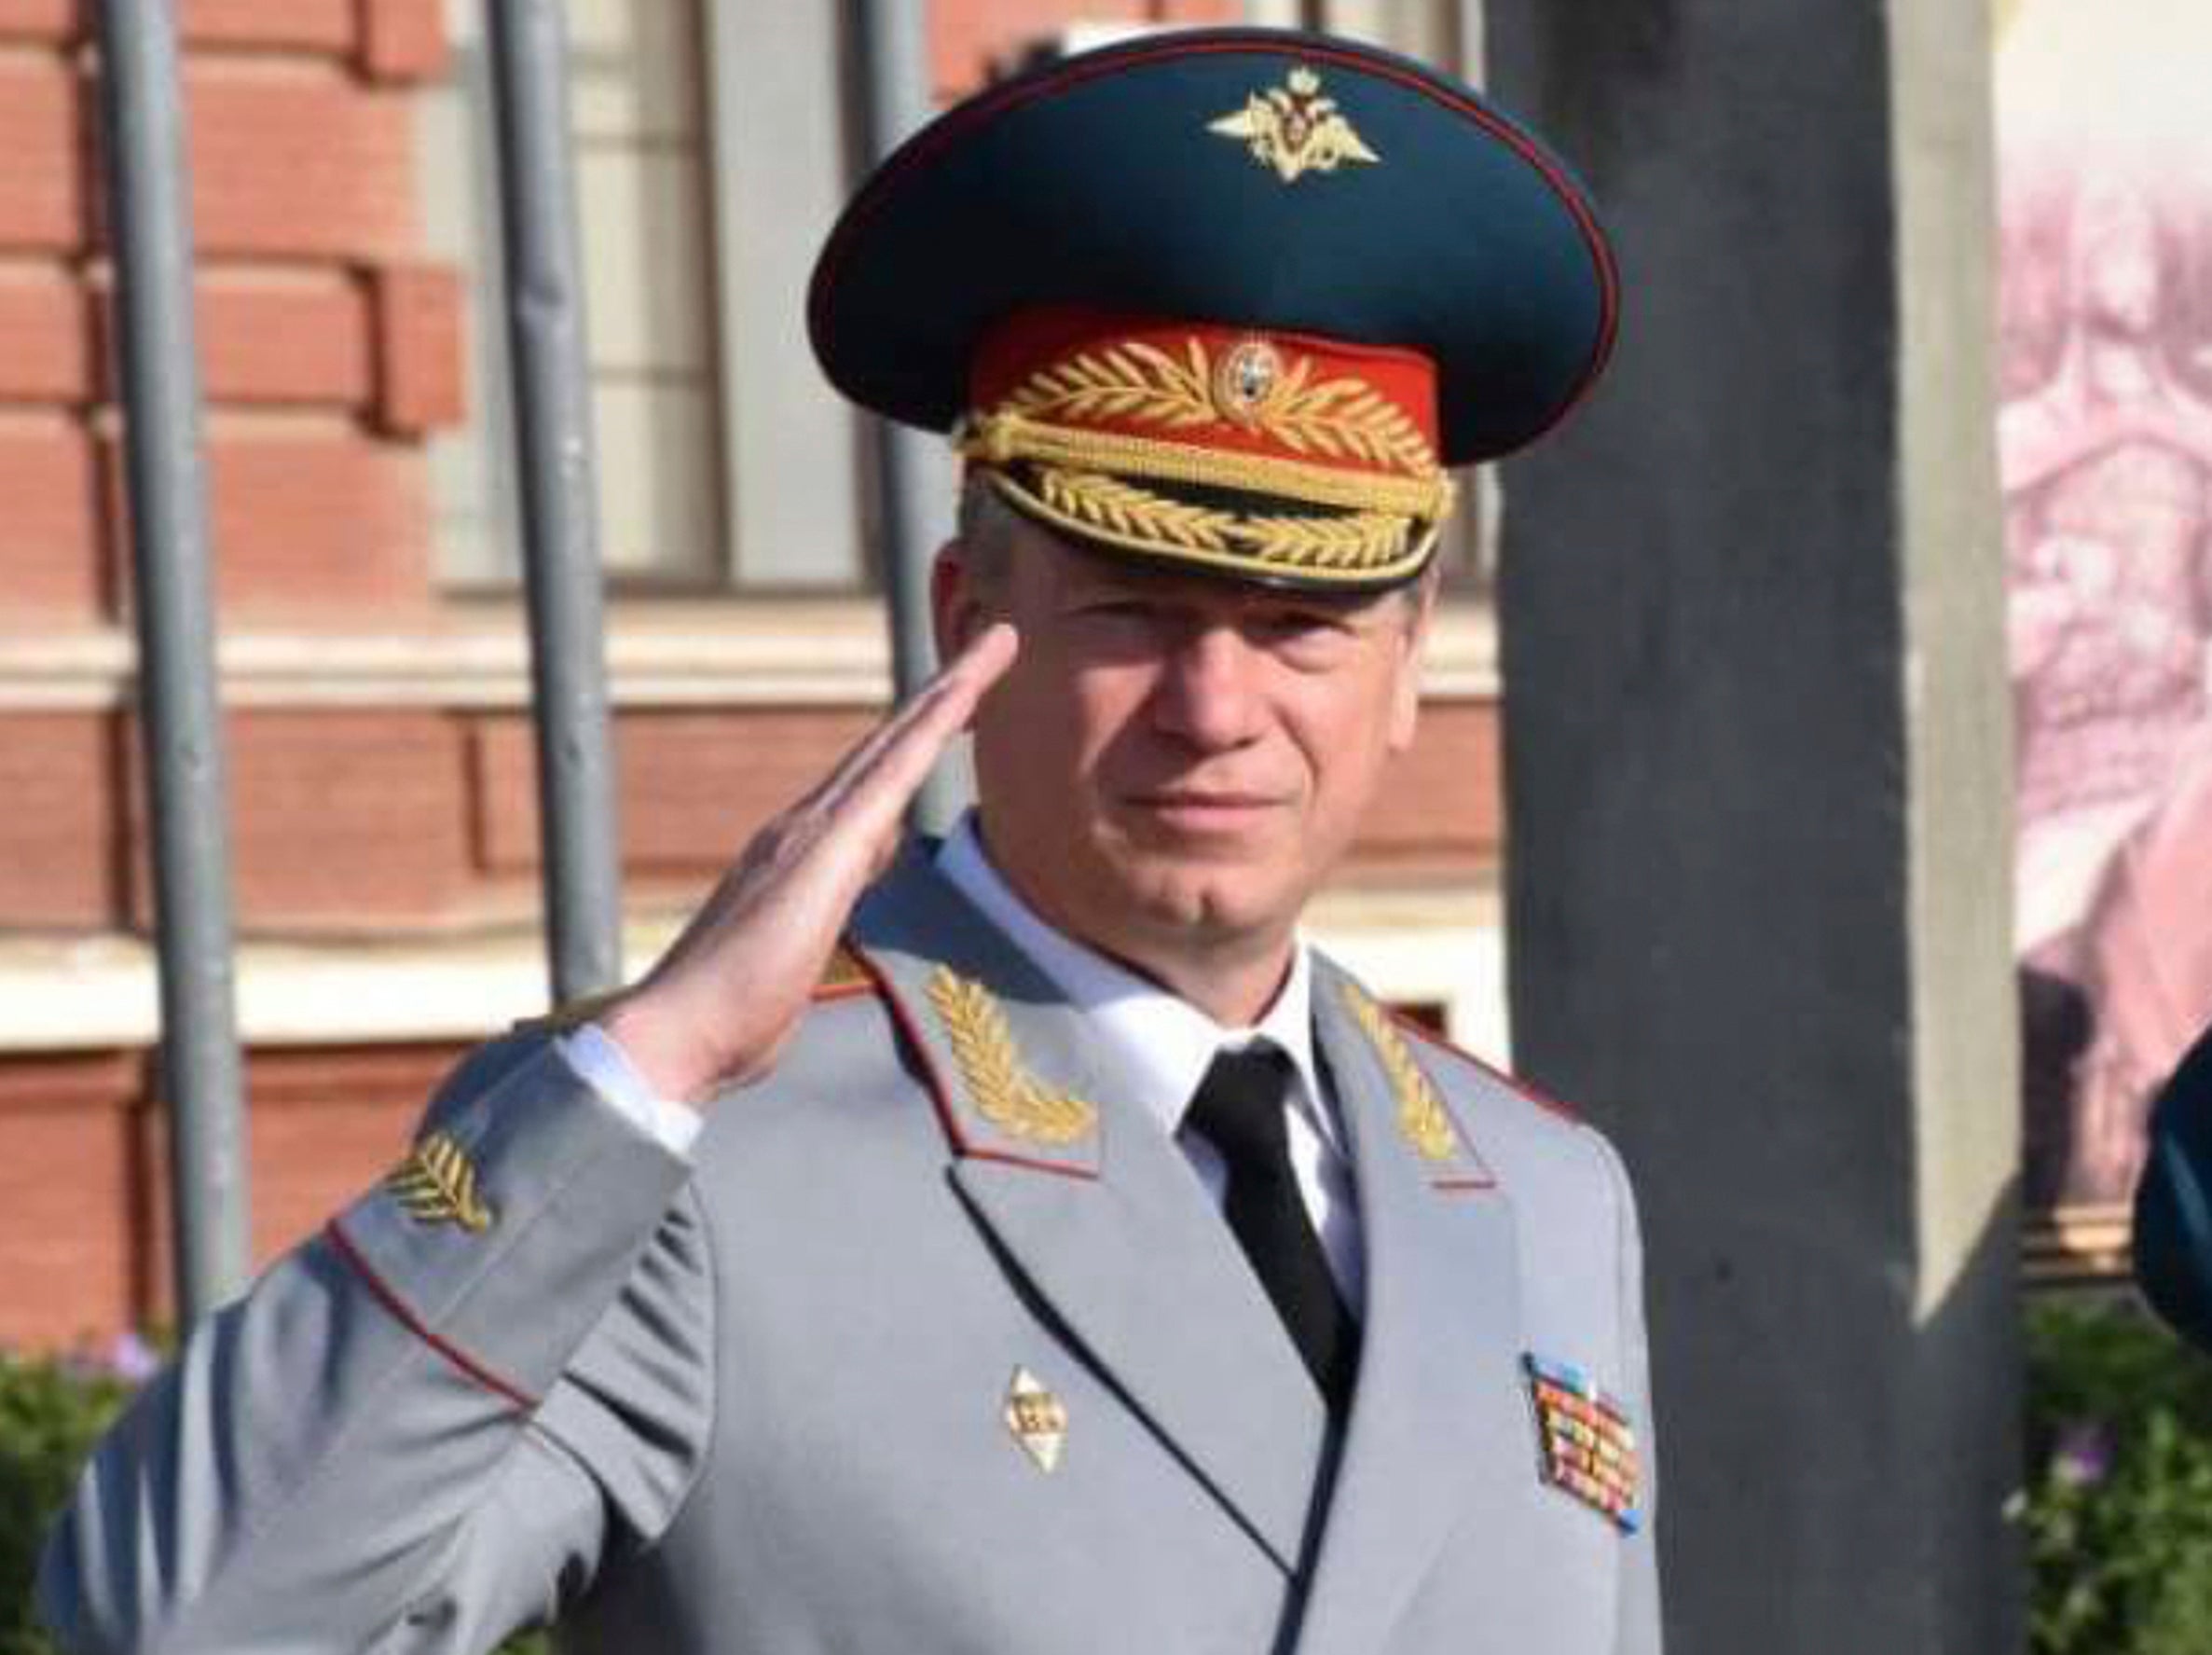 In this undated photo distributed by Russian Defense Ministry Press Service on Saturday, Aug. 28, 2021, Russian Lt. Gen. Yury Kuznetsov is seen during a military parade in a Russian military academy in Krasnodar, Russia,.